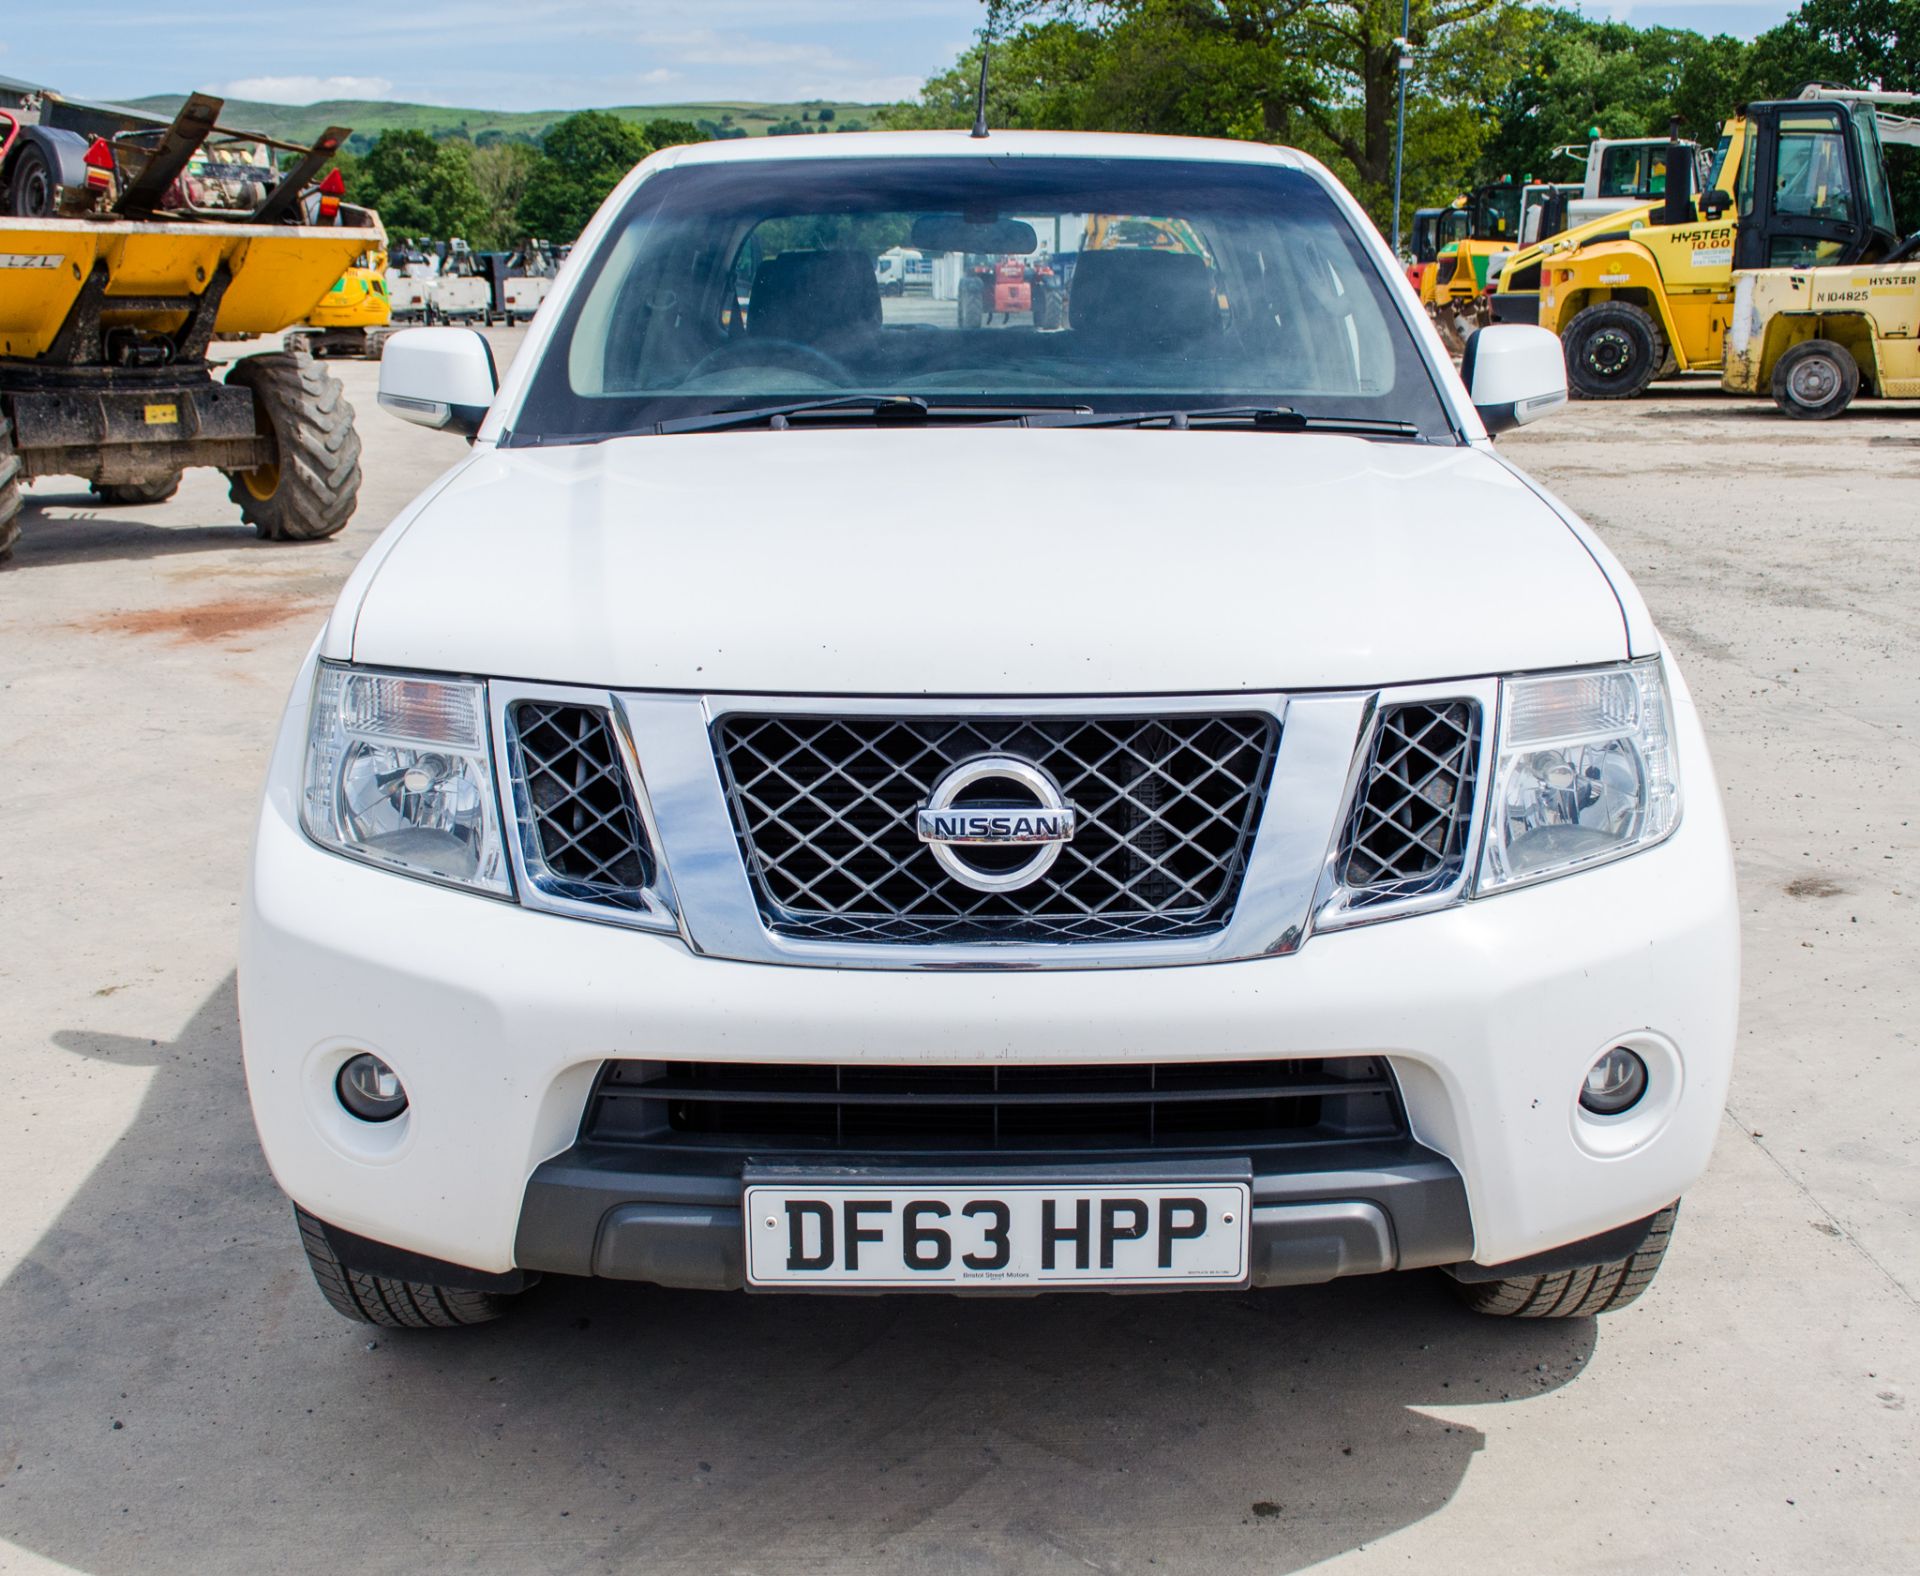 Nissan Navara Acenta DCI 6 speed manual double cab pick up Registration Number: DF63 HPP Date of - Image 5 of 31